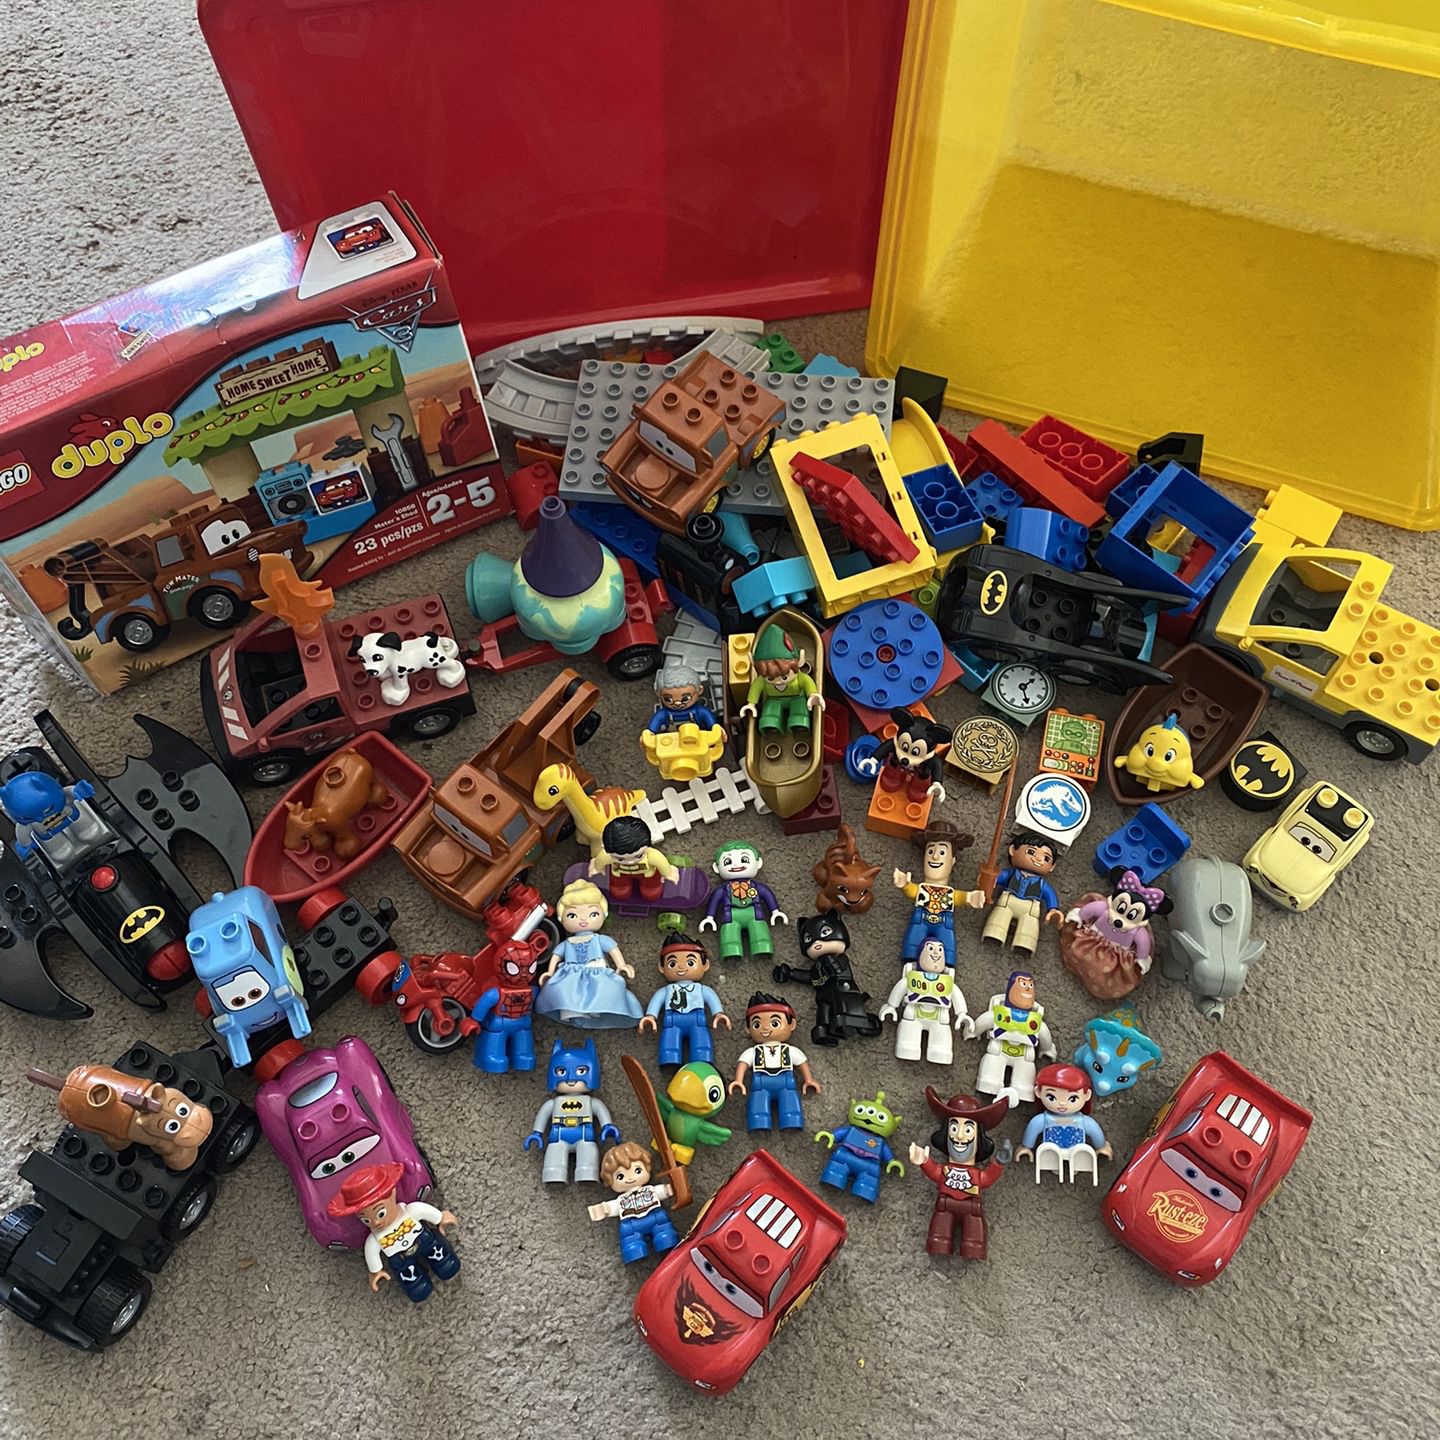 Lego Duplo Huge Lot Marvel DC Comics Disney Pixar Mickey Mouse Batman Spiderman Cars & More Plus New In Box Maters Shed for Sale in Boulder City, NV OfferUp